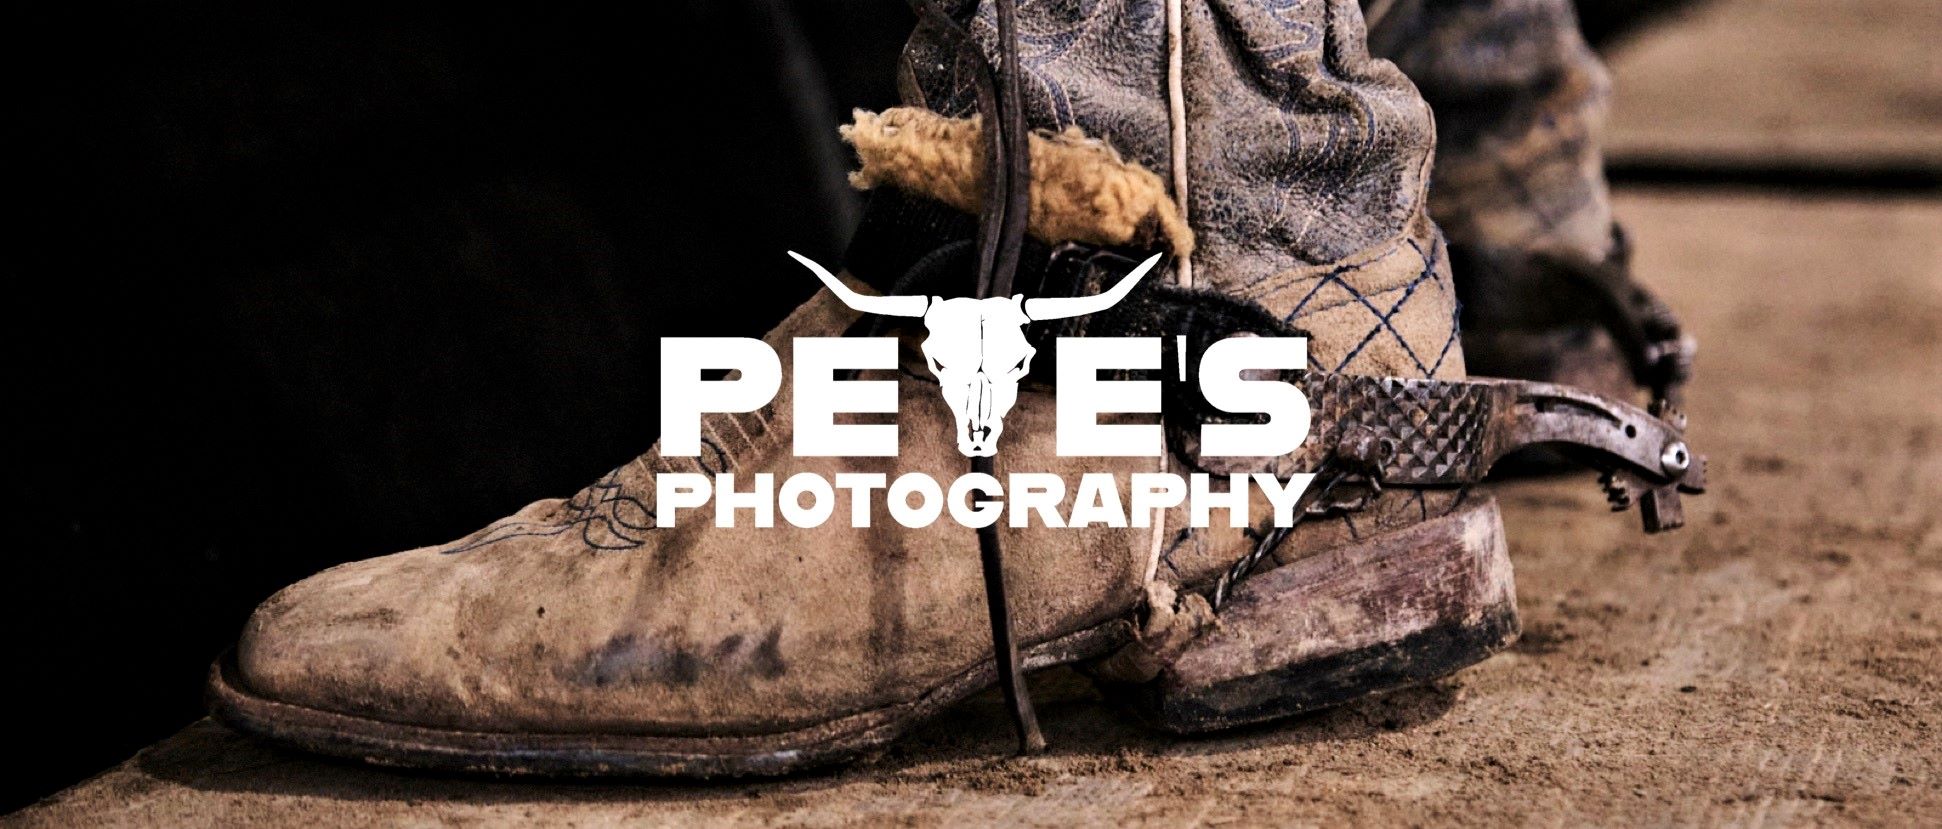 Pete's Photography - Equine, Rodeo and Western Photographer